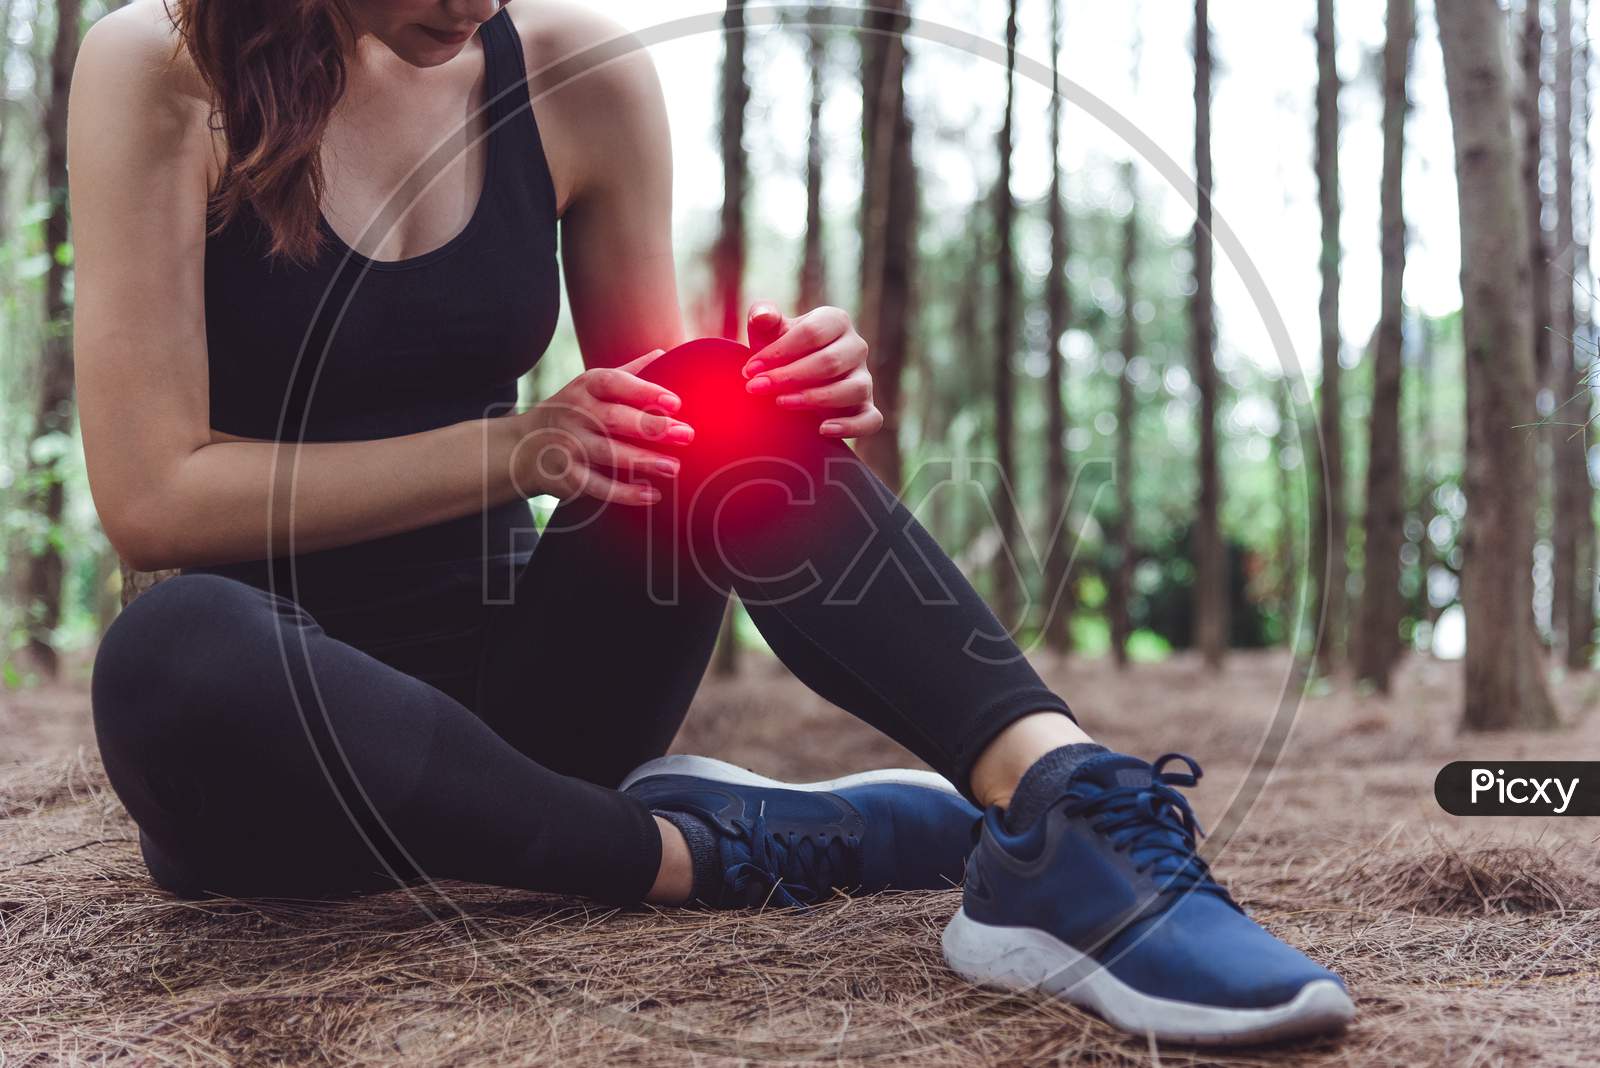 Sport Woman Injury At Knee During Jogging In Forest. Pine Woods Background.  Medical And Healthcare Concept. Nature And People Theme. Lifestyles Theme. Red Light Spot Use